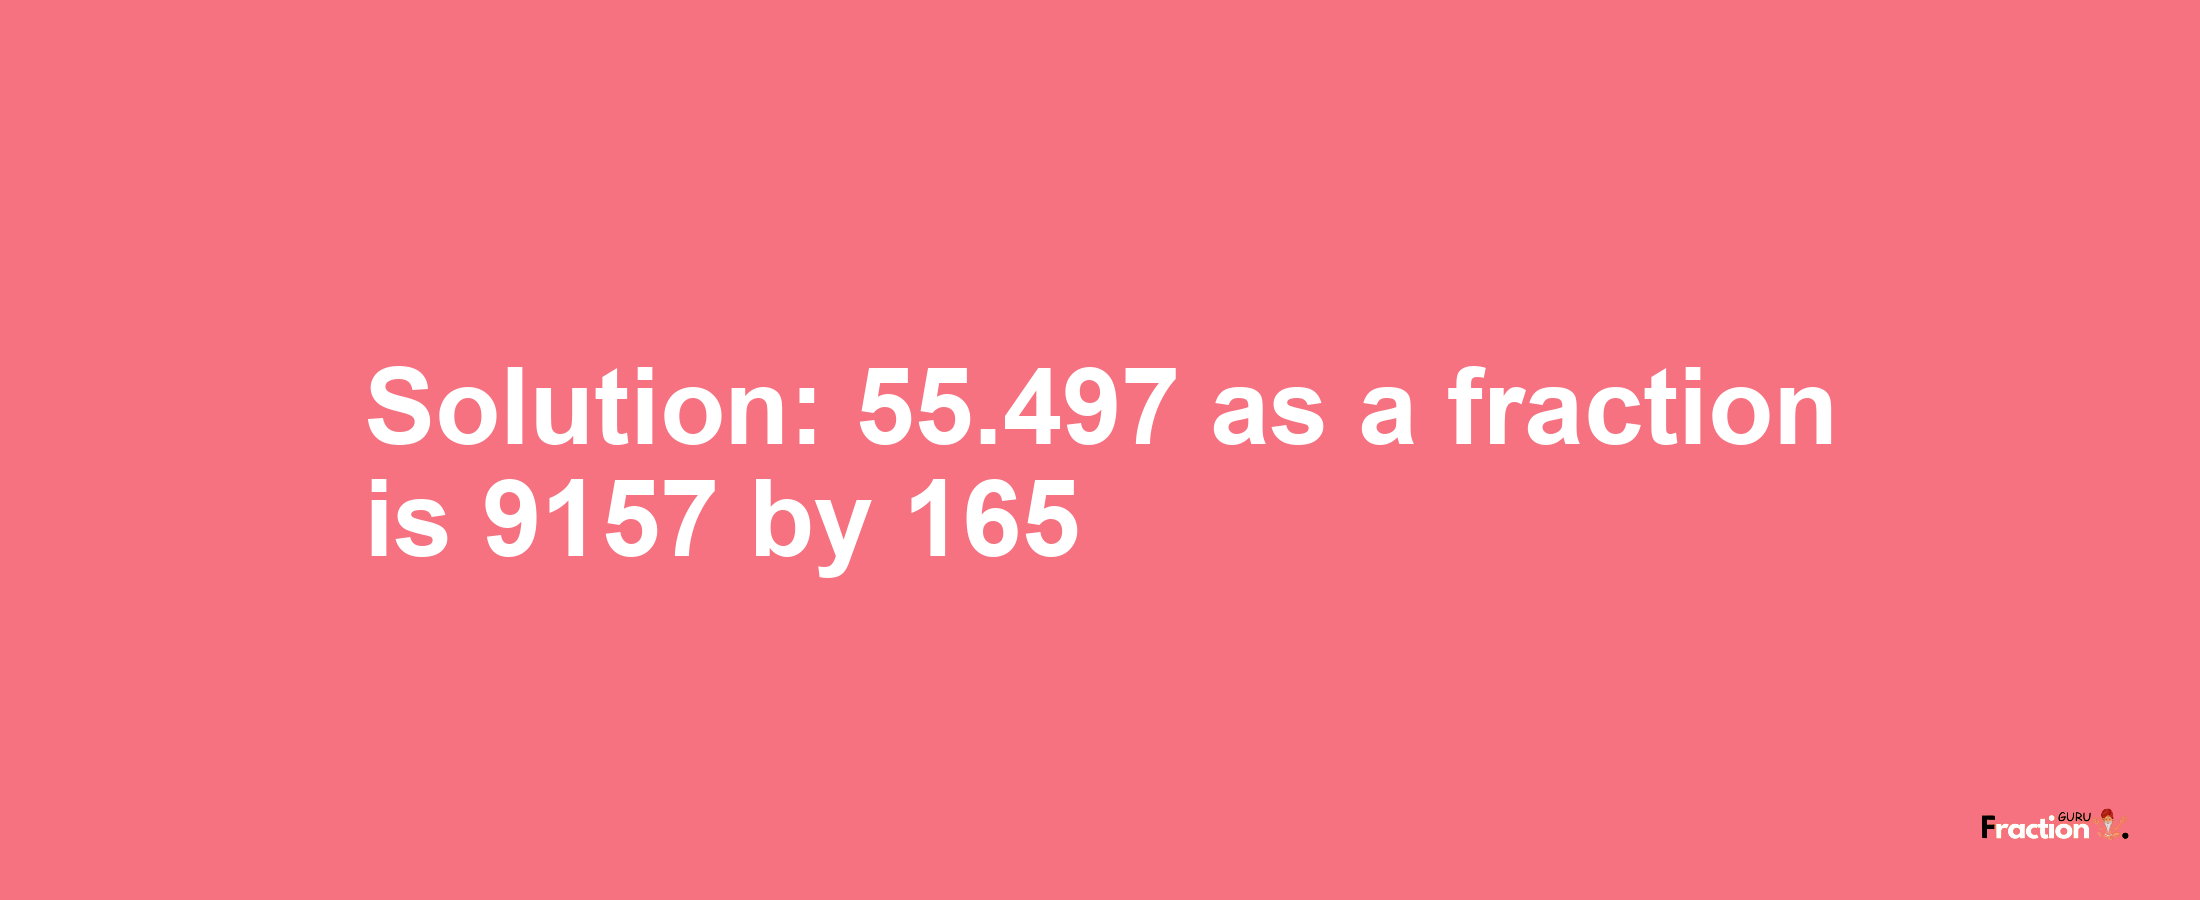 Solution:55.497 as a fraction is 9157/165